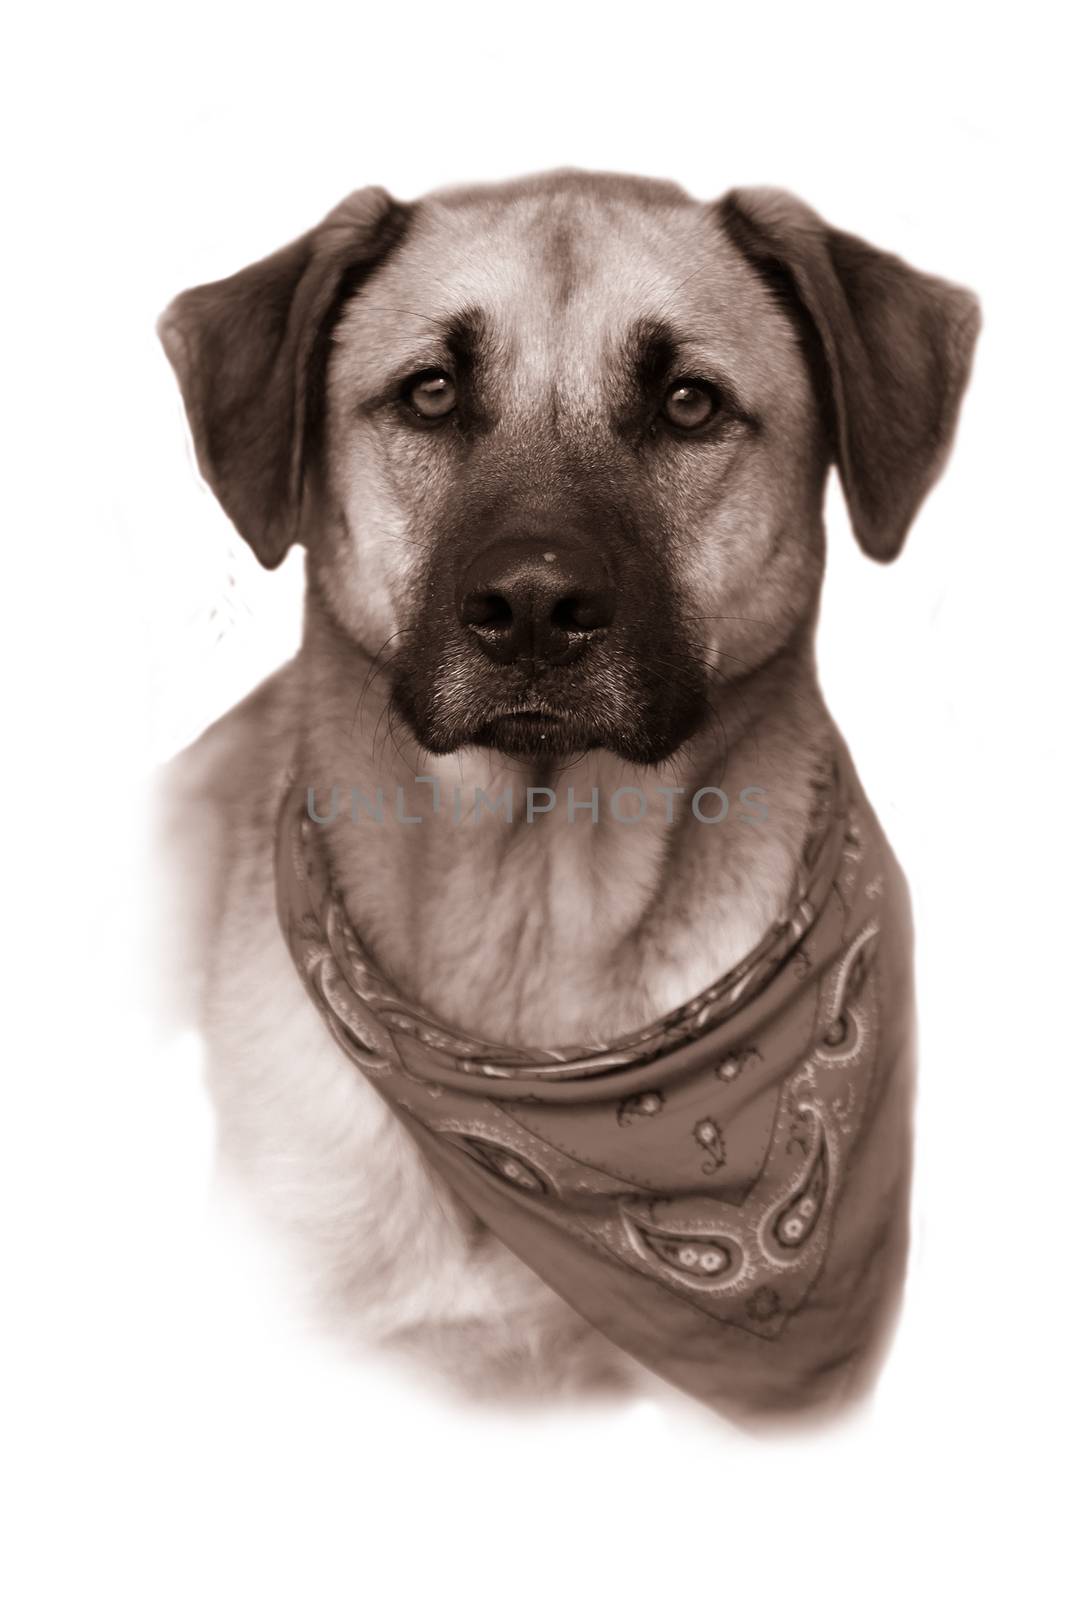 Portrait or bust of handsome large mixed Boxer, Retreiver, Shepherd breed dog,  fading to a white background in vintage sepia color